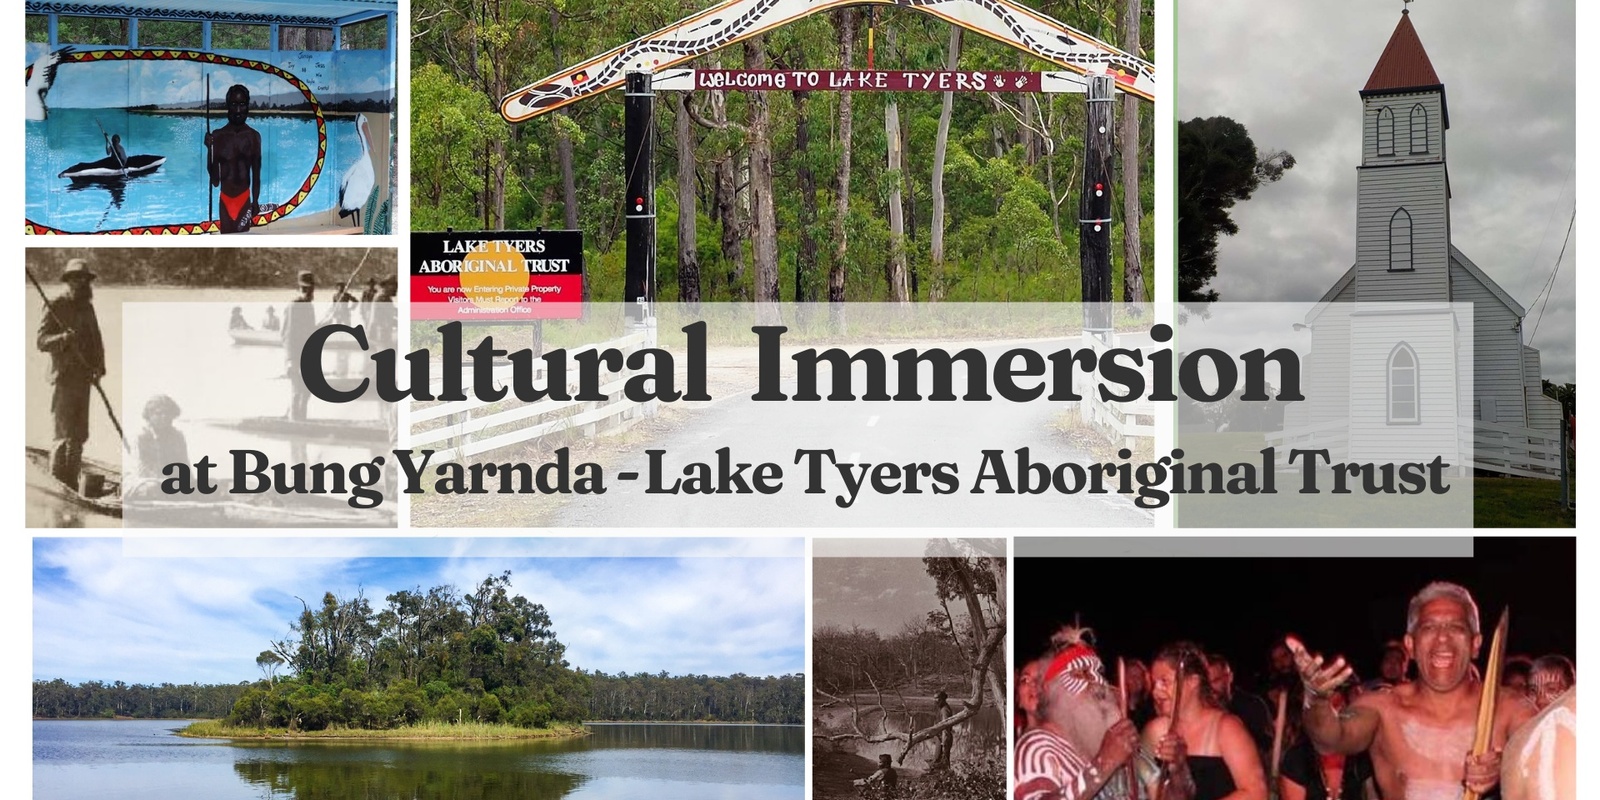 Banner image for Cultural Immersion Day at Bung Yarnda - Lake Tyers Aboriginal Trust